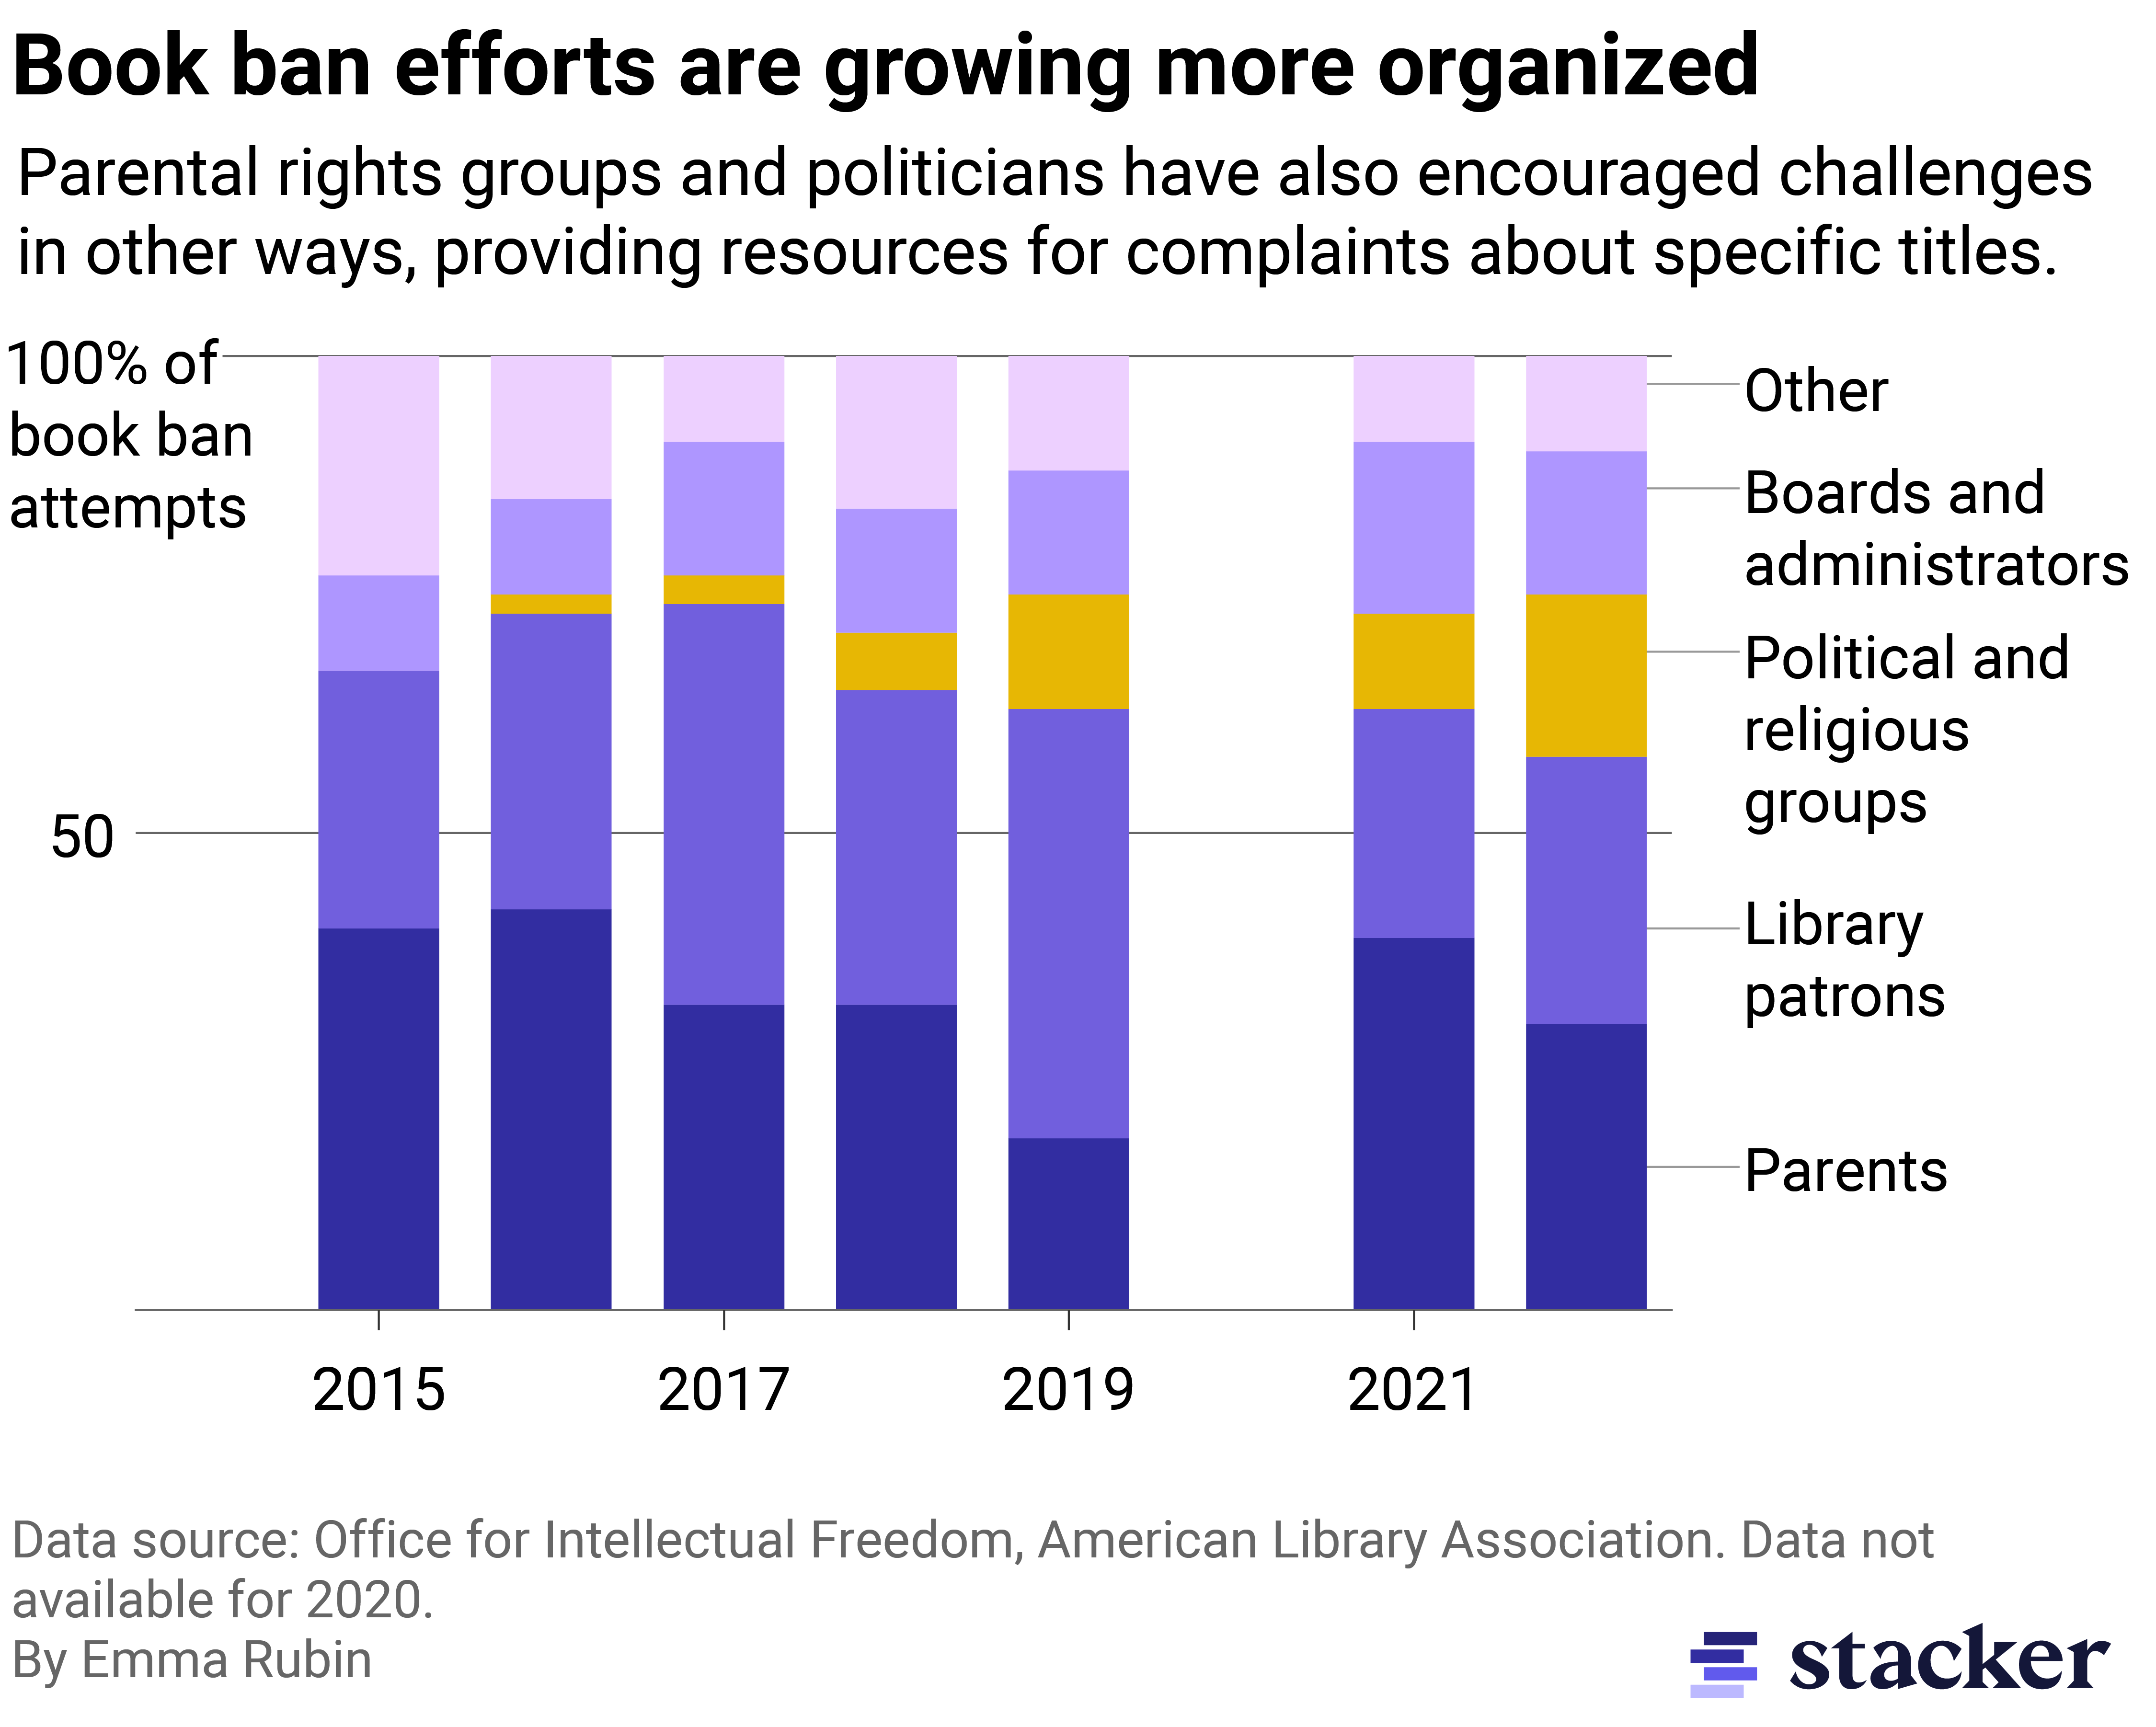 Column chart showing book ban efforts are growing more organized. Groups have also emboldened parents to challenge materials in less direct ways, providing resources for complaints about titles.